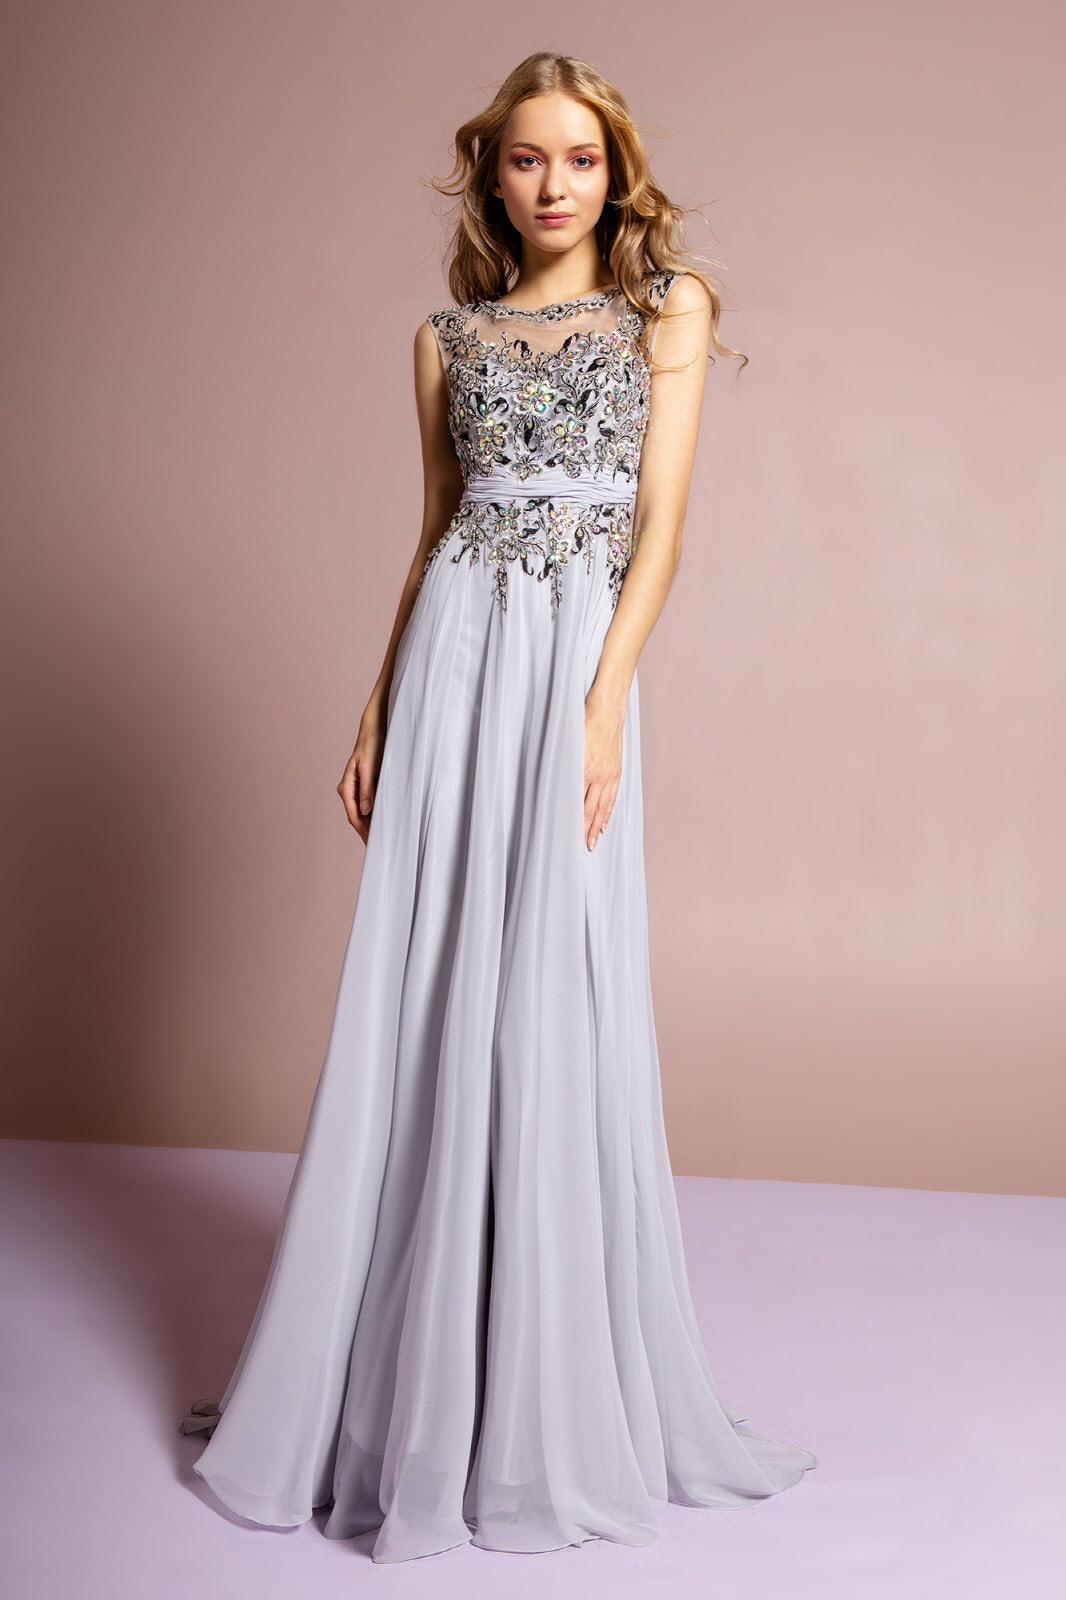 Long Dress with Lace and Jewel Embellished Bodice-smcdress